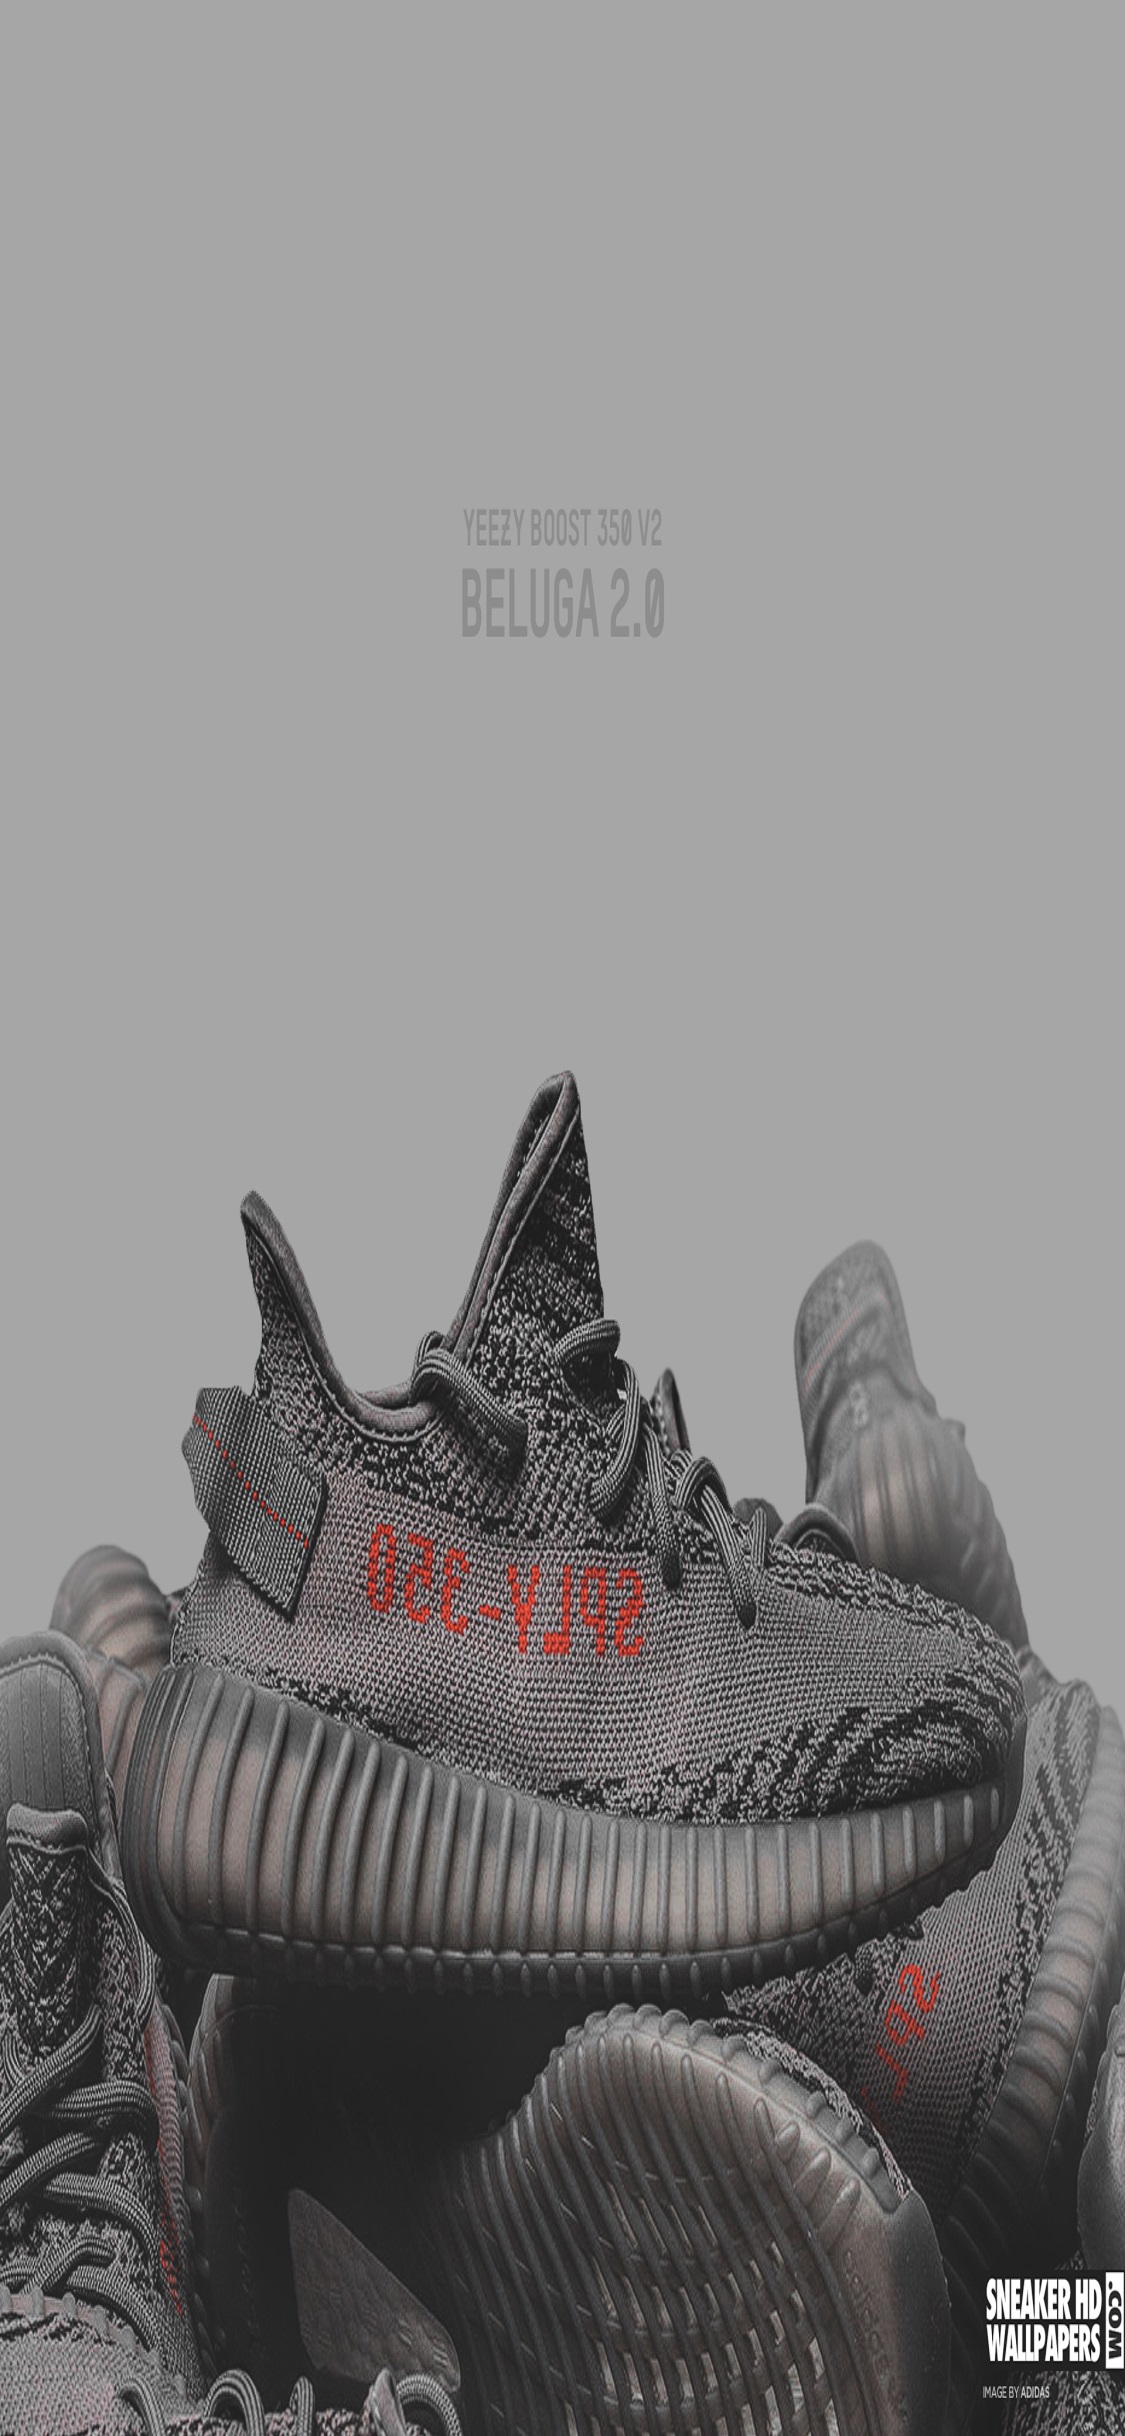 London Wallpaper For Iphone London Wallpaper For Iphone - Yeezy Boost 350 V2 Beluga 2.0 , HD Wallpaper & Backgrounds